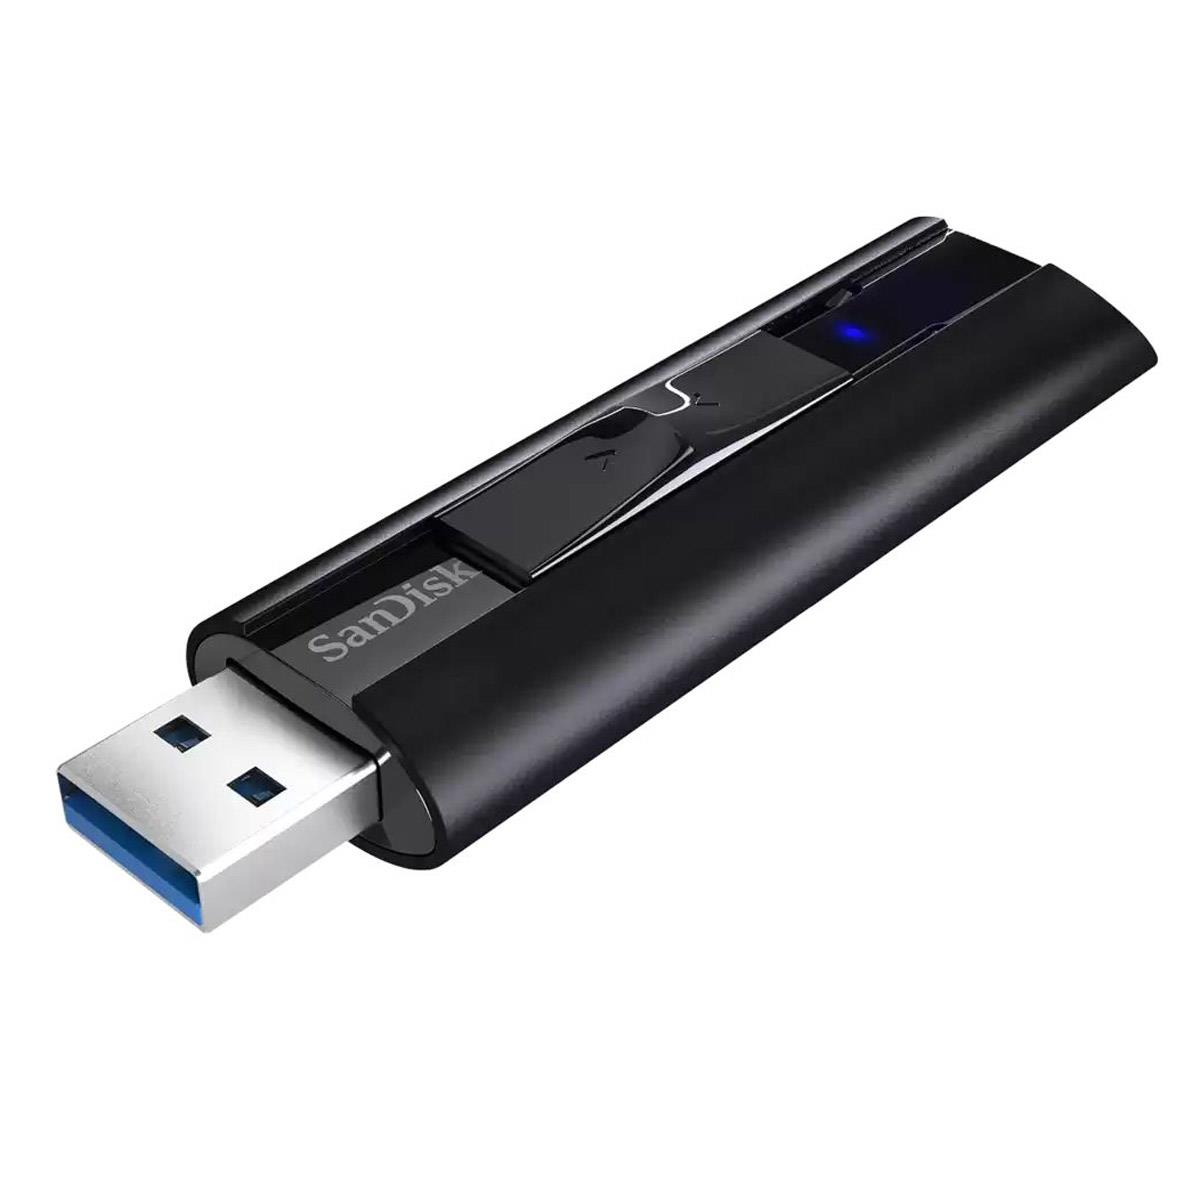 

SanDisk Extreme PRO 256GB USB 3.2 Gen 1 Solid State Flash Drive